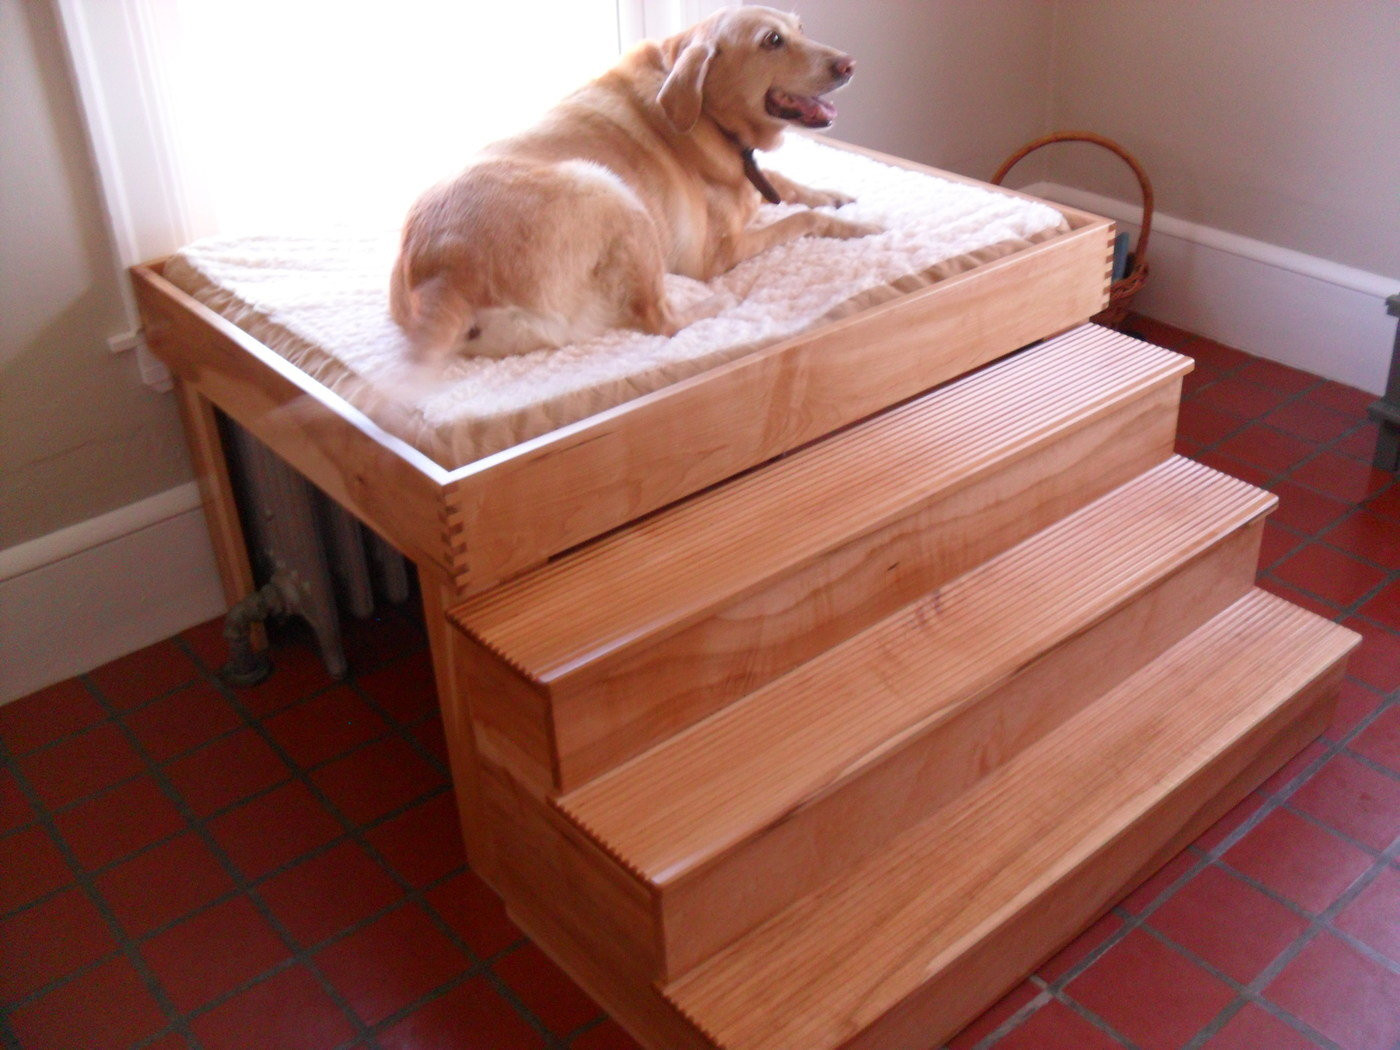 Elevated Dog Bed DIY
 Elevated dog bed by Anthony Saporiti at Coroflot